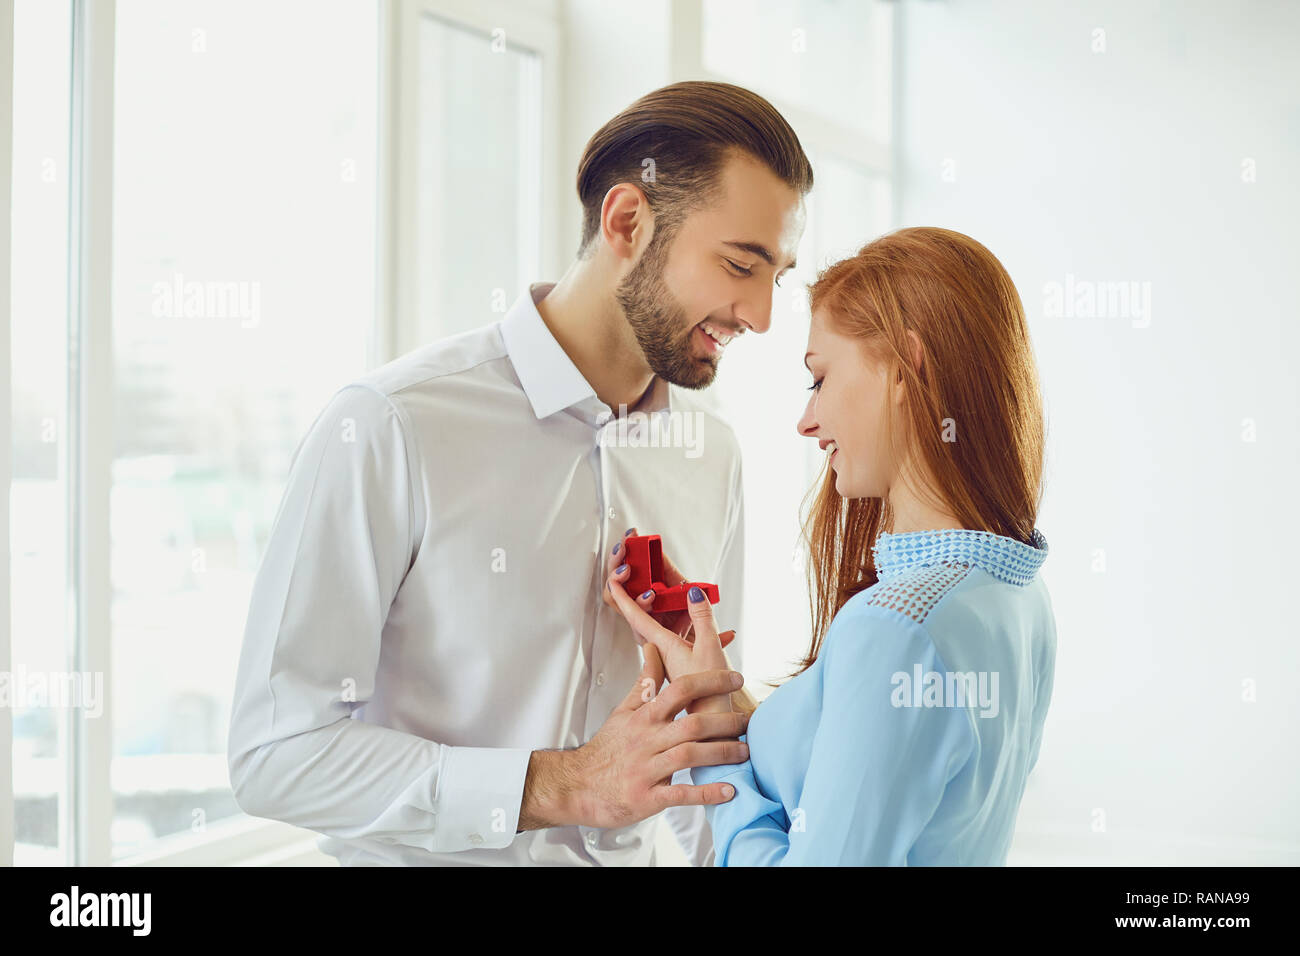 Man proposes to a girl in room with bright windows. Stock Photo